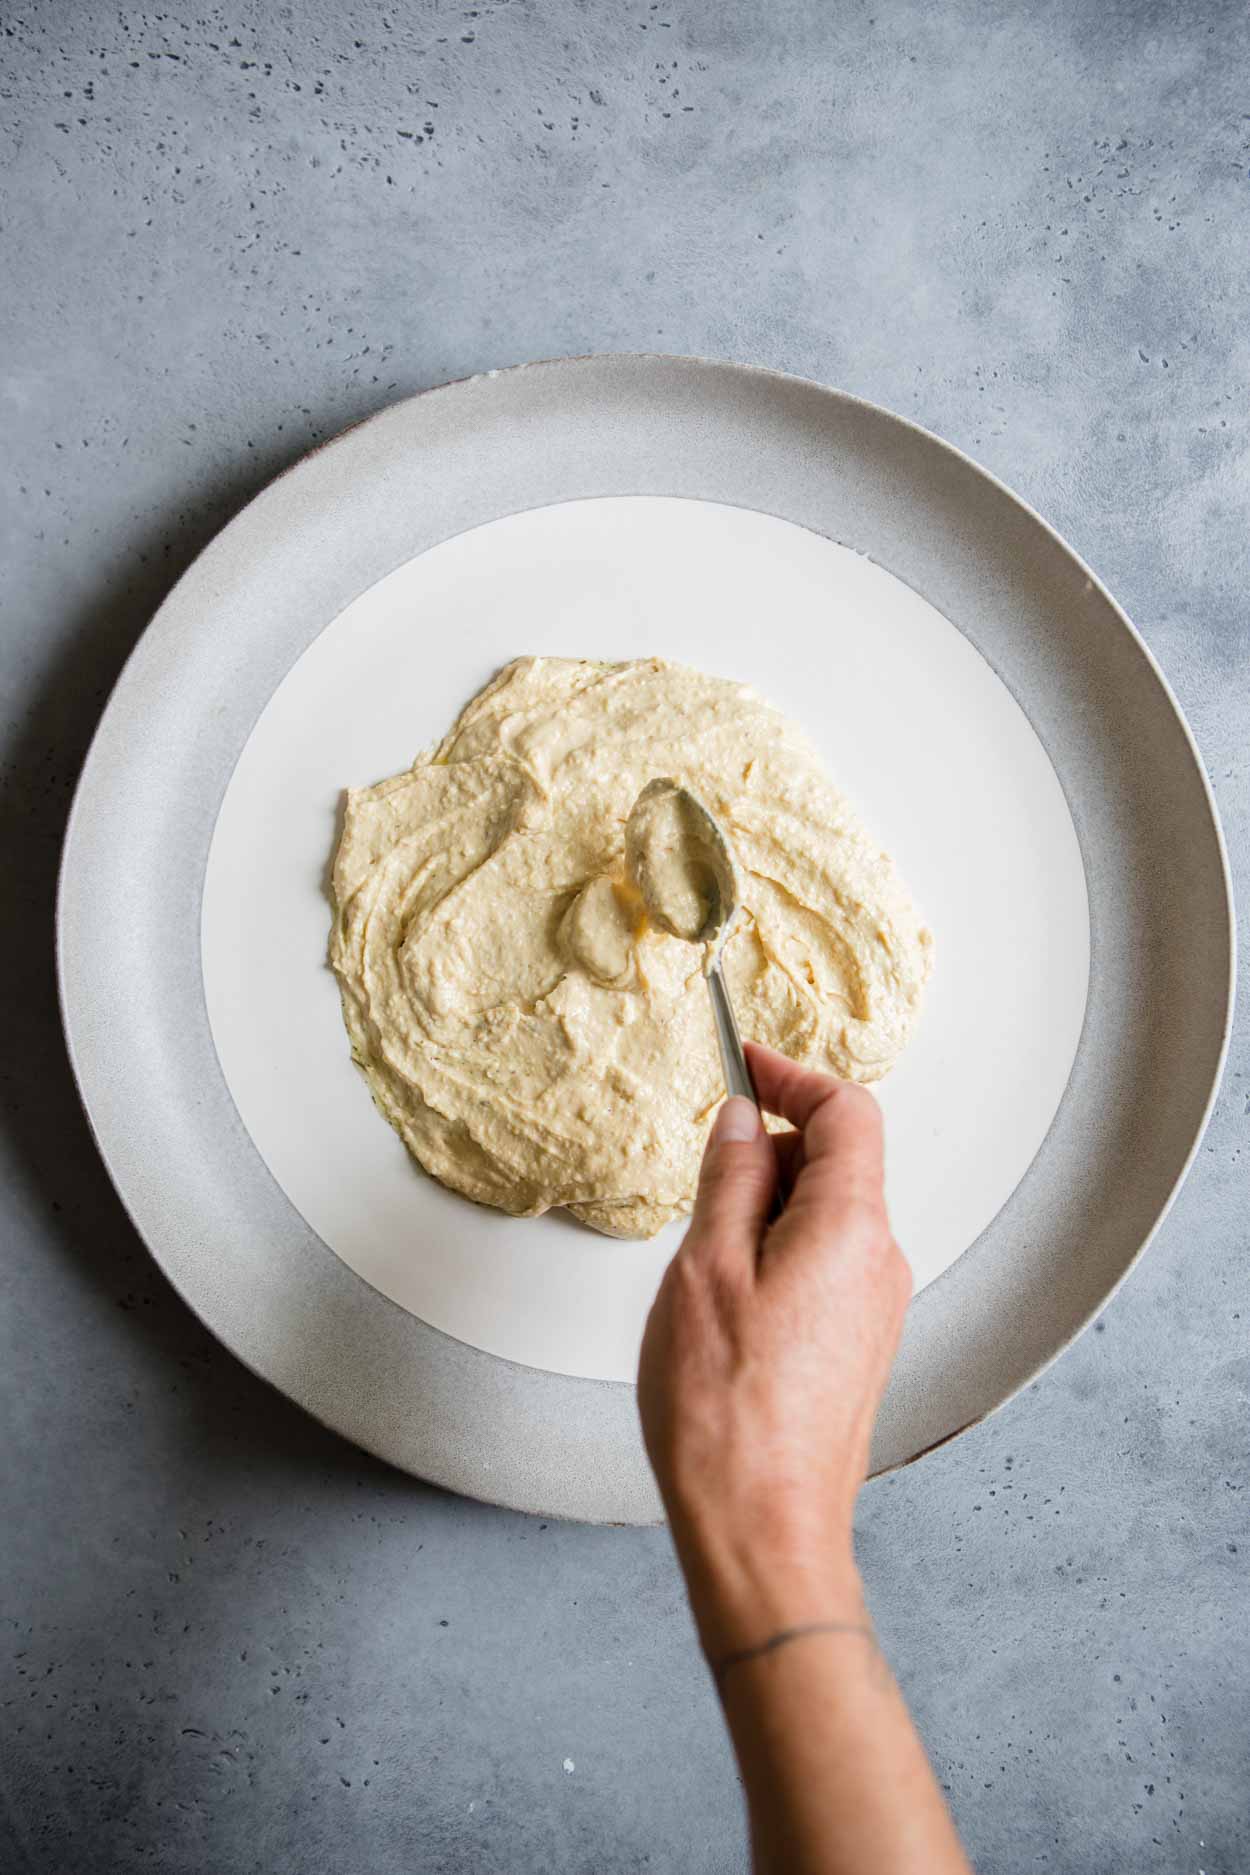 hummus being spread into center of plate with a spoon